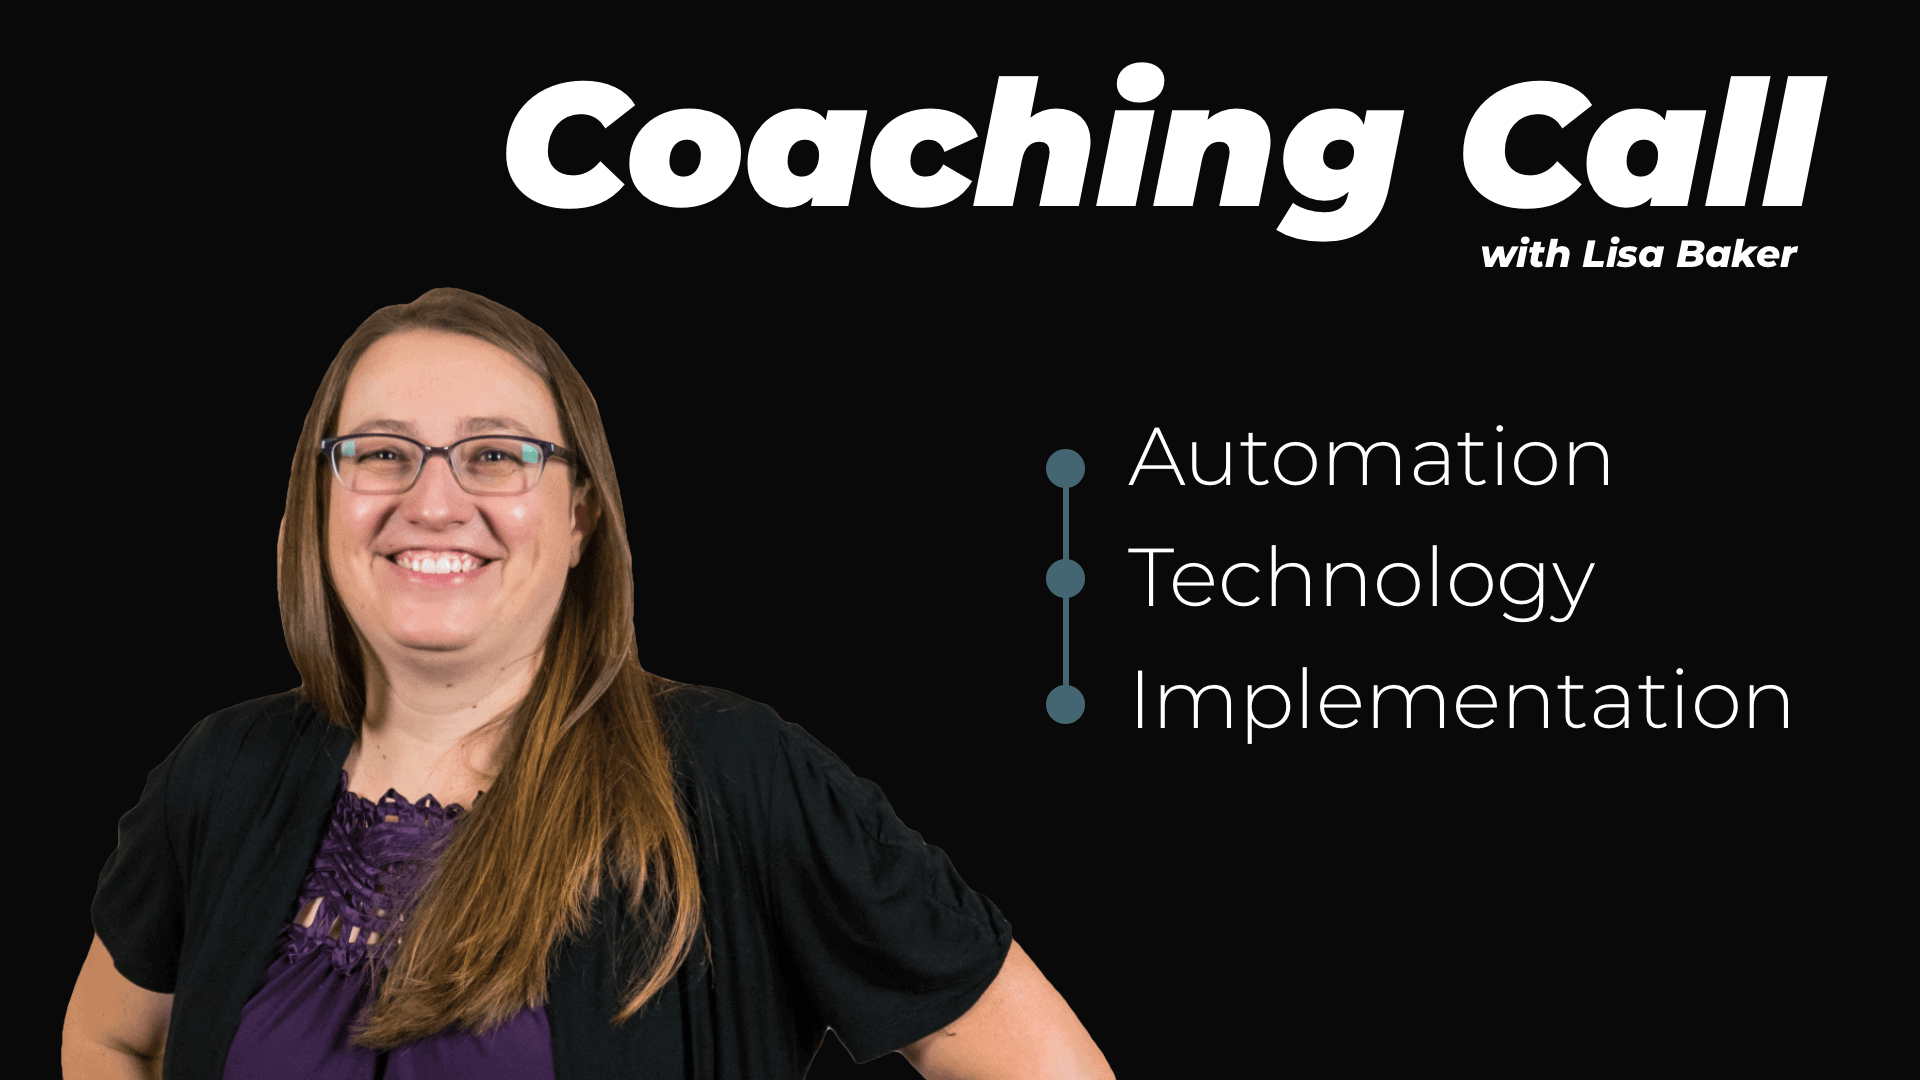 Coaching call with Lisa Baker